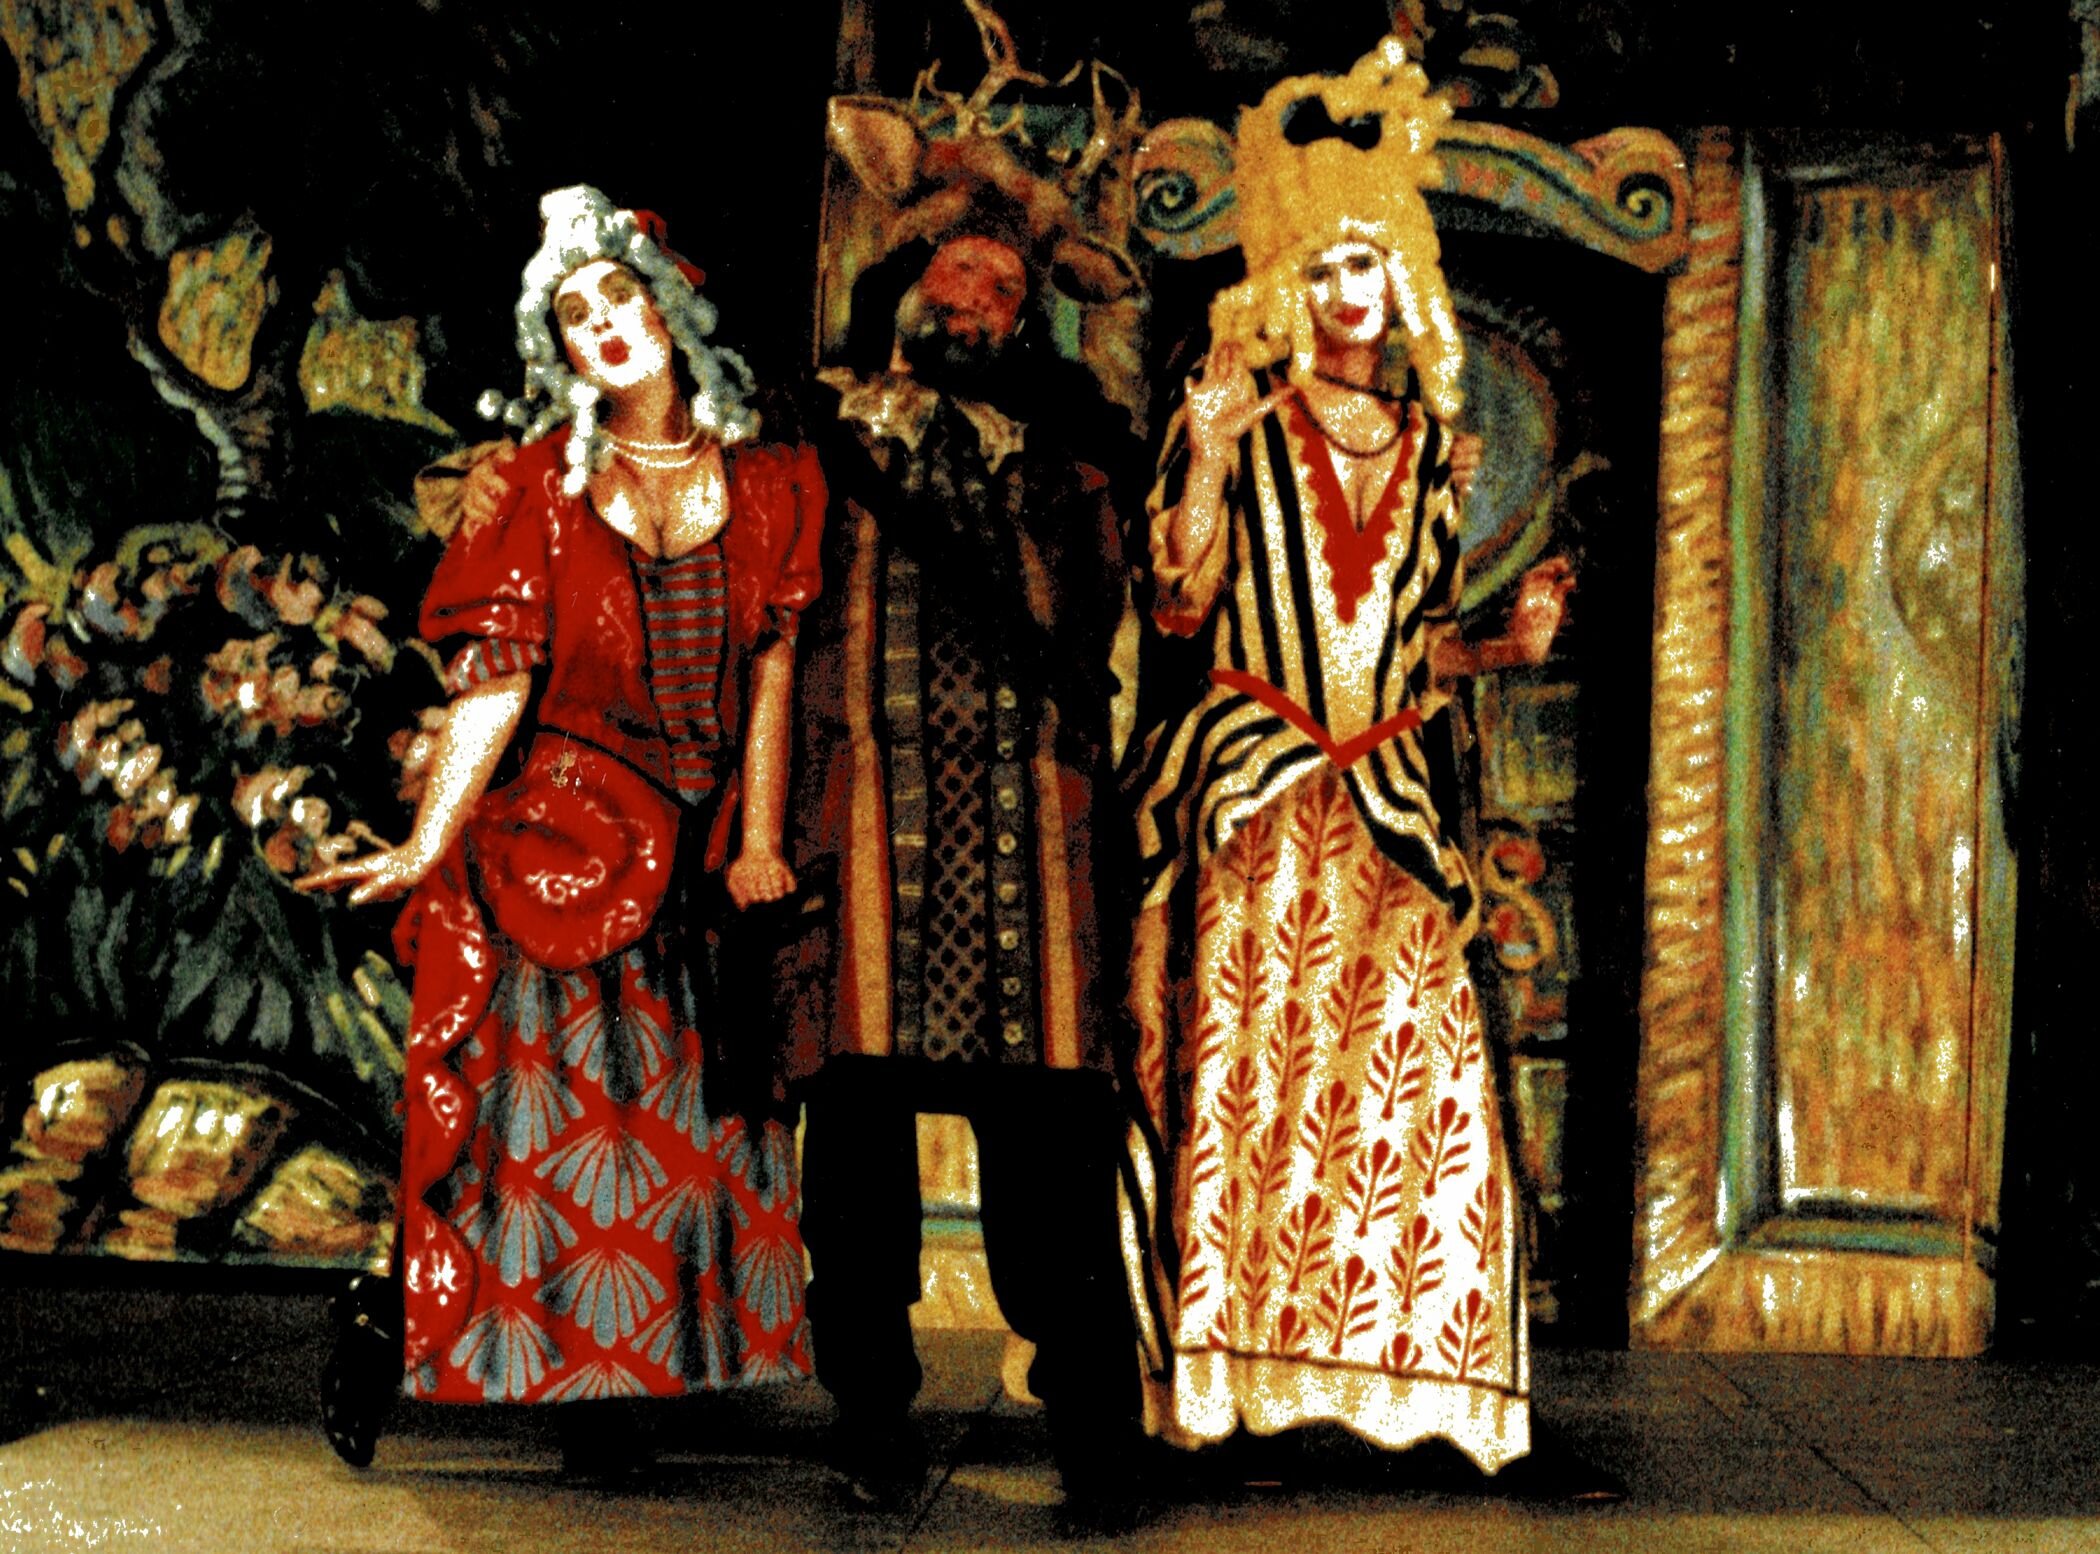 1996 – The Merry Wives of Windsor